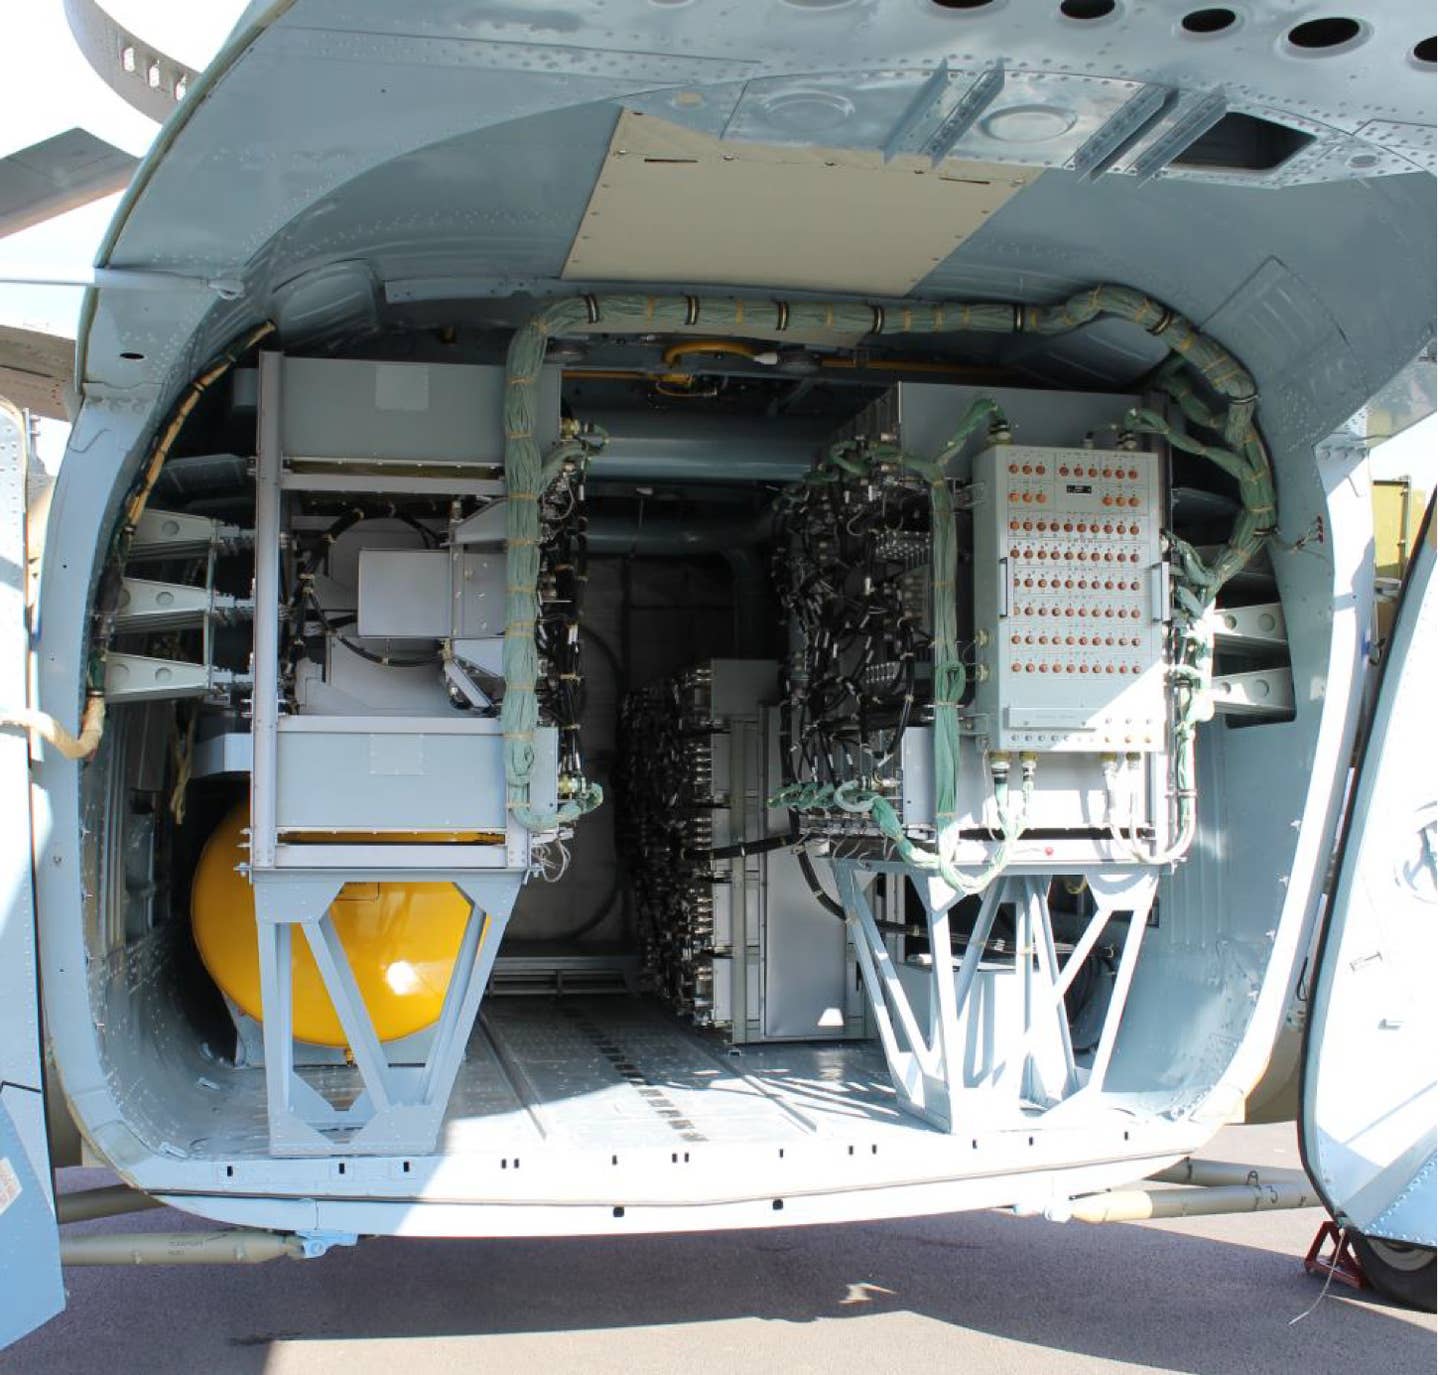 The equipment boxes take up the entire space within the hold of the Mi-8MTPR-1 helicopter. <em>KNIRTI</em>